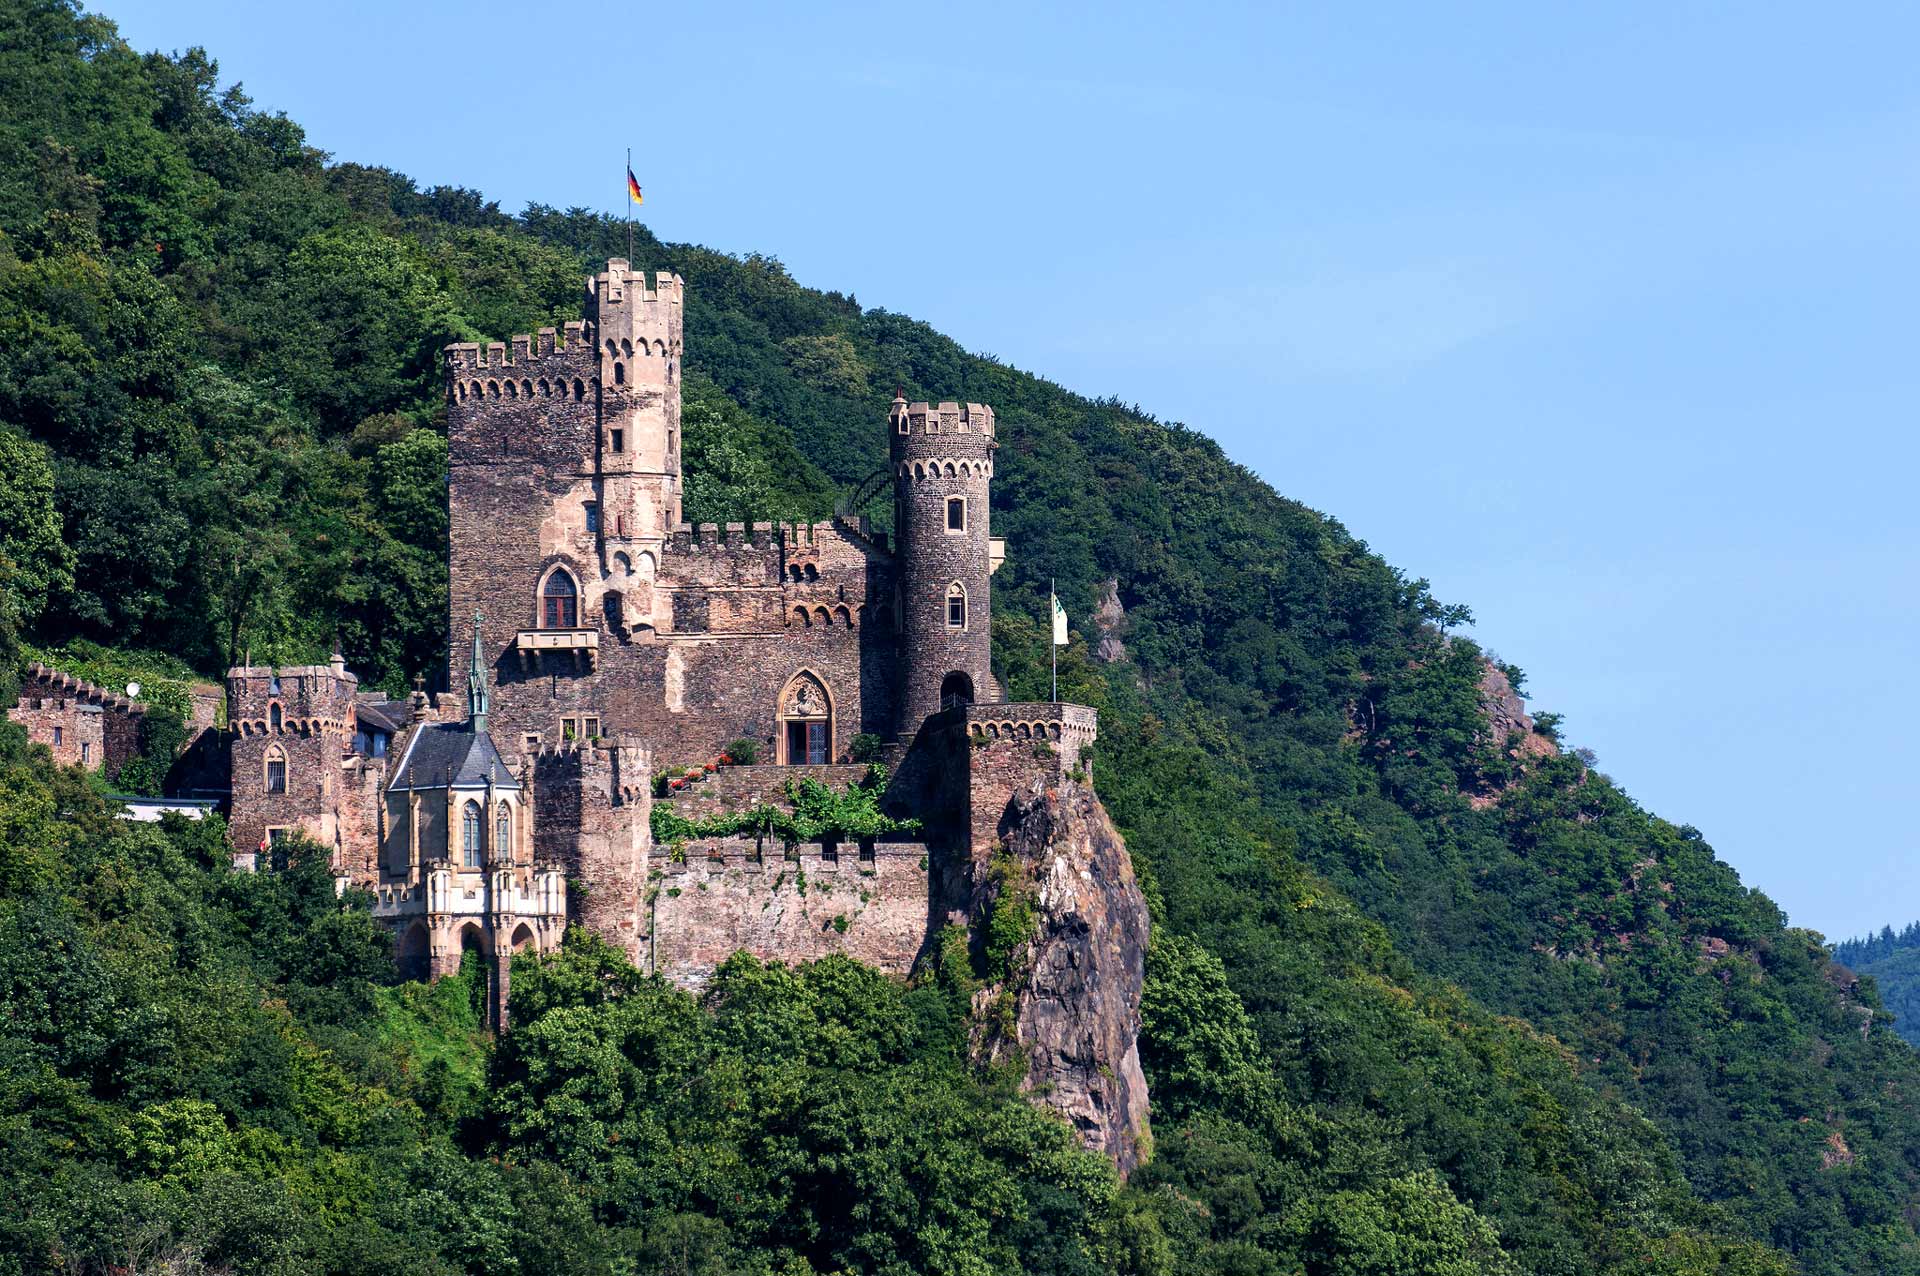 Beautiful view of Rheinstein Castle from afar surrounded by green trees